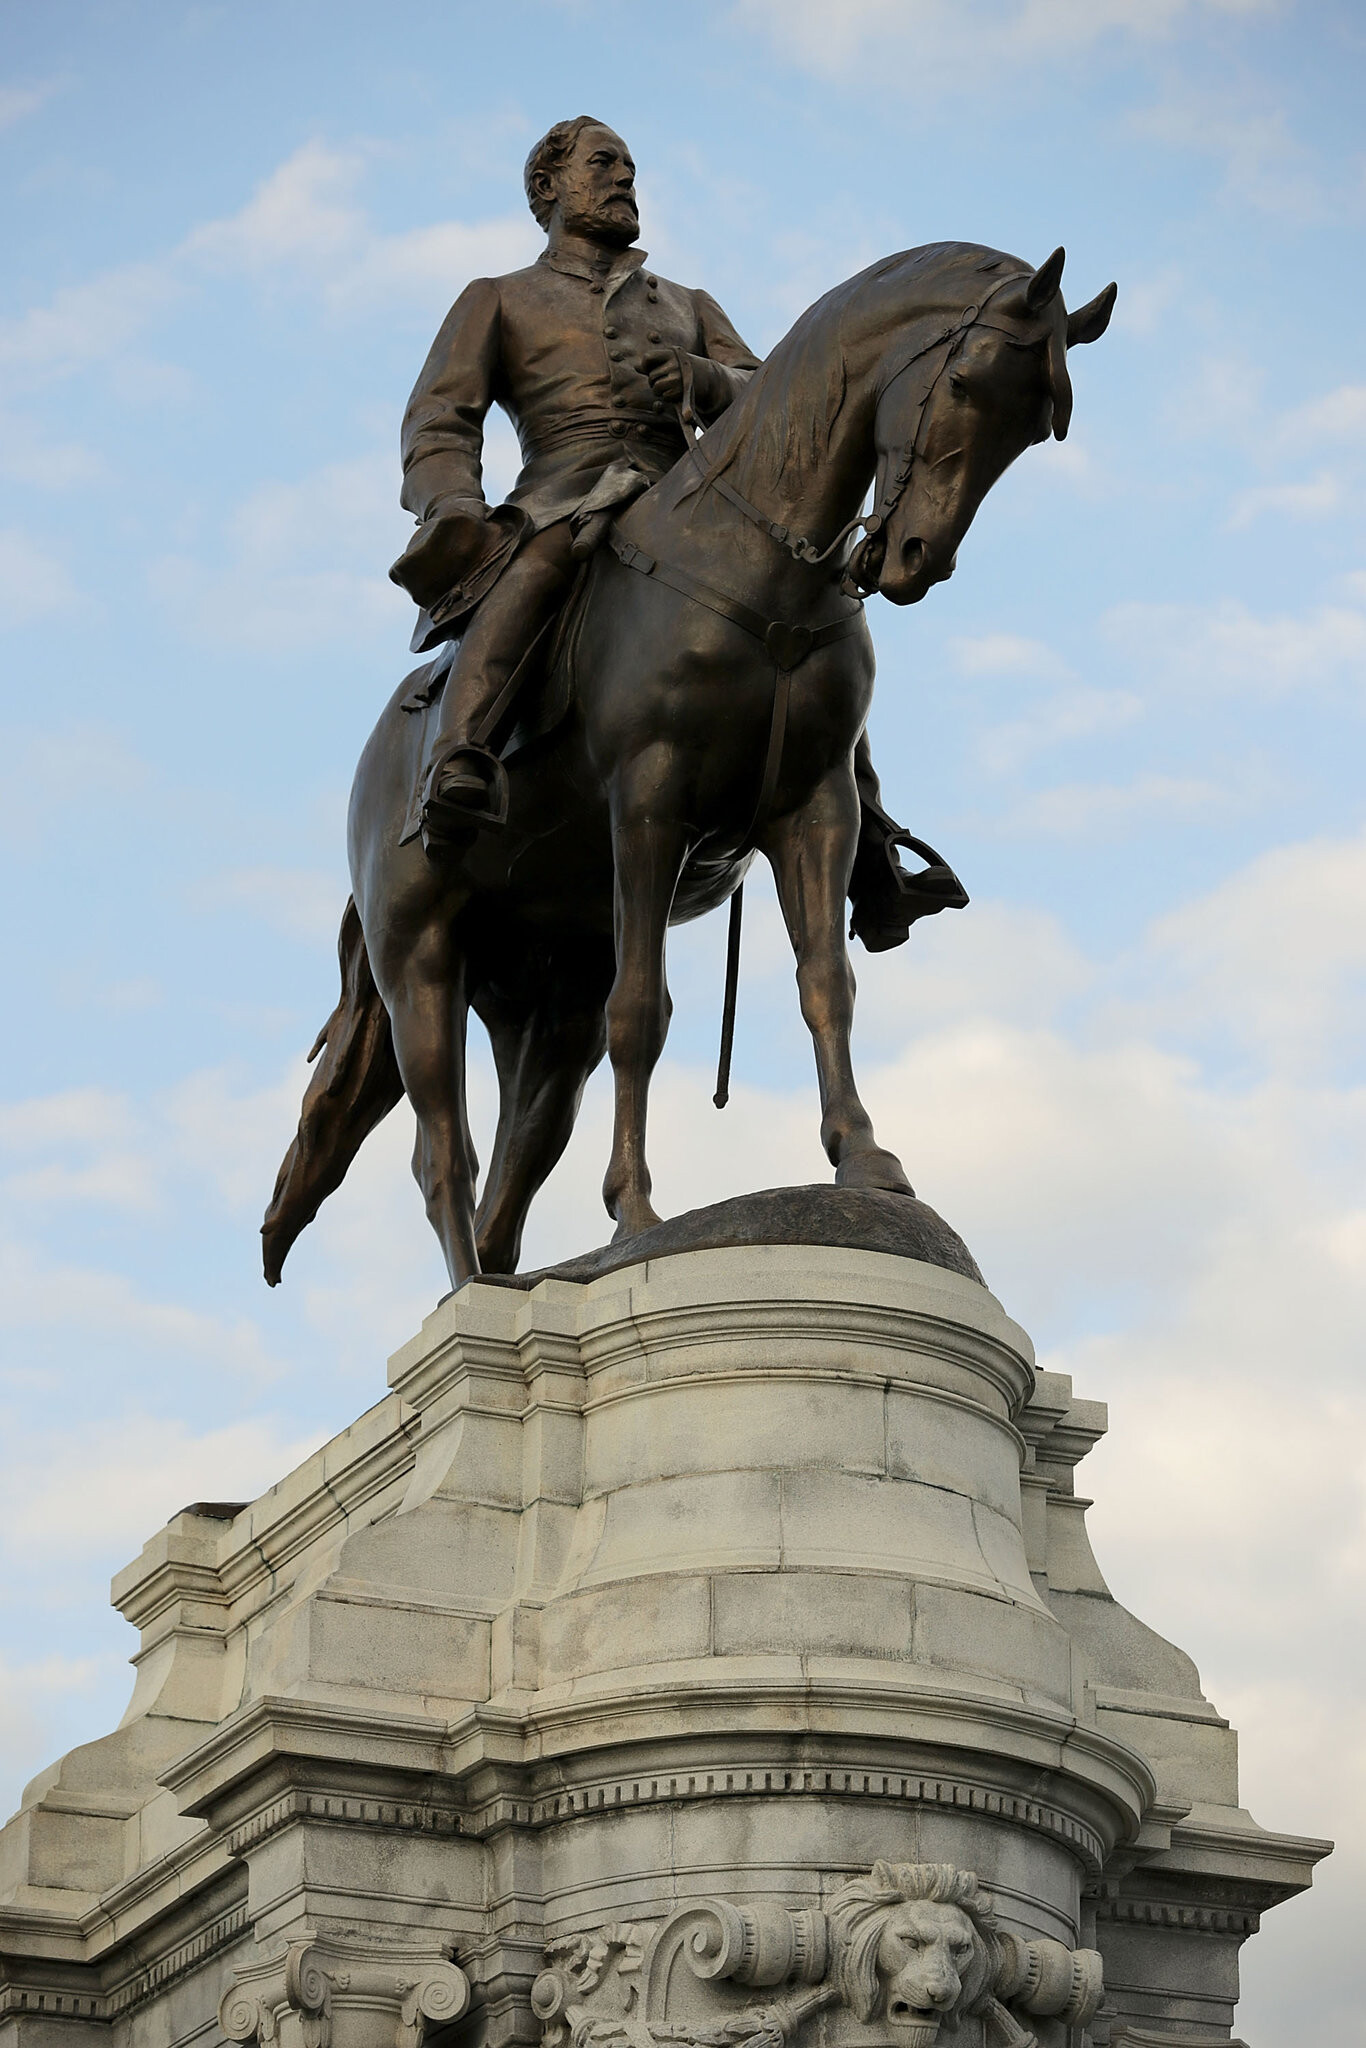 General Lee (Robert Edward): Richmond's statue of Confederate General Robert E. Lee, Statues commemorating controversial historical figures. 1370x2050 HD Wallpaper.